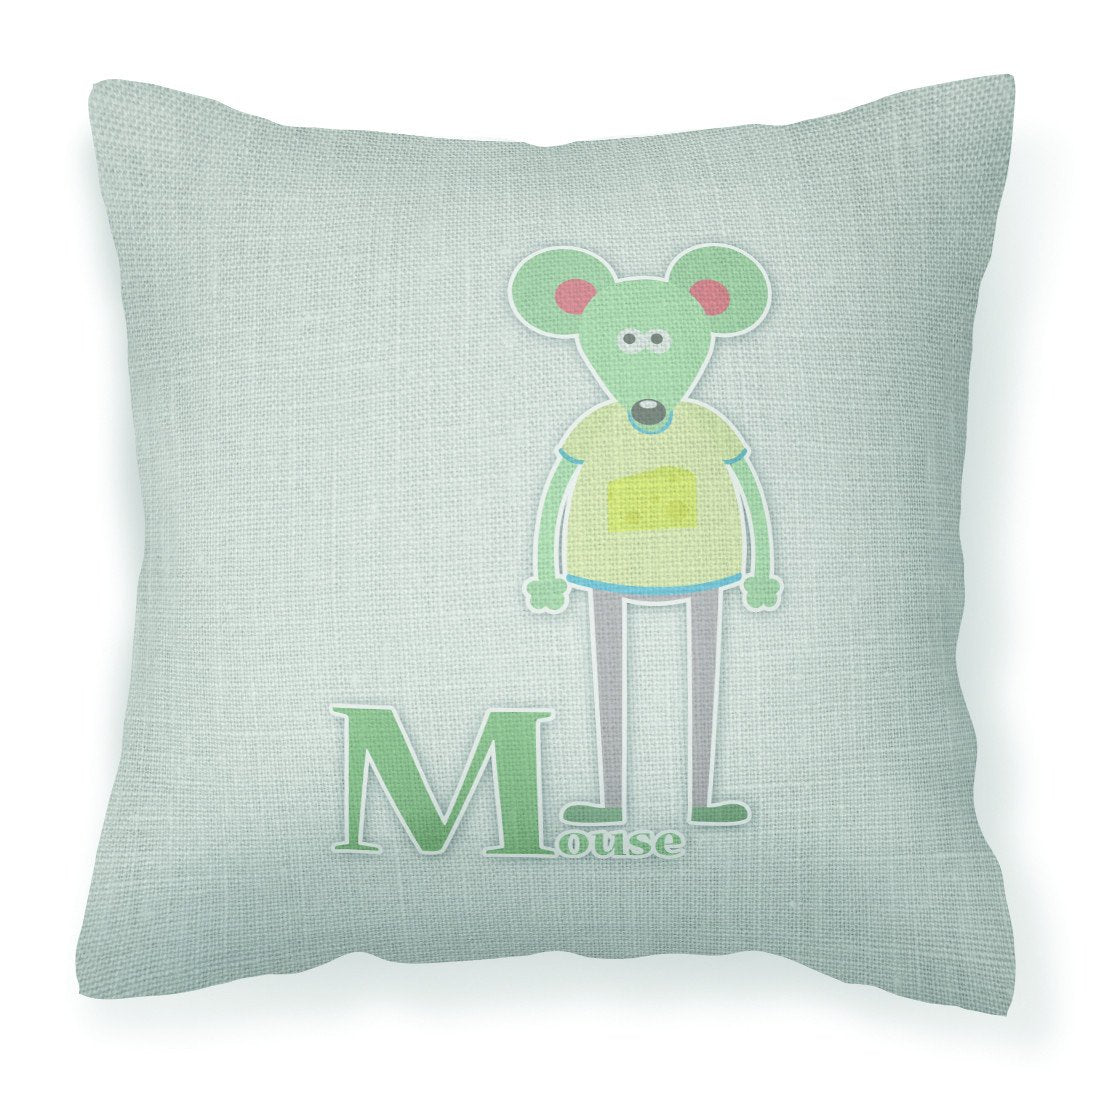 Alphabet M for Mouse Fabric Decorative Pillow BB5738PW1818 by Caroline's Treasures